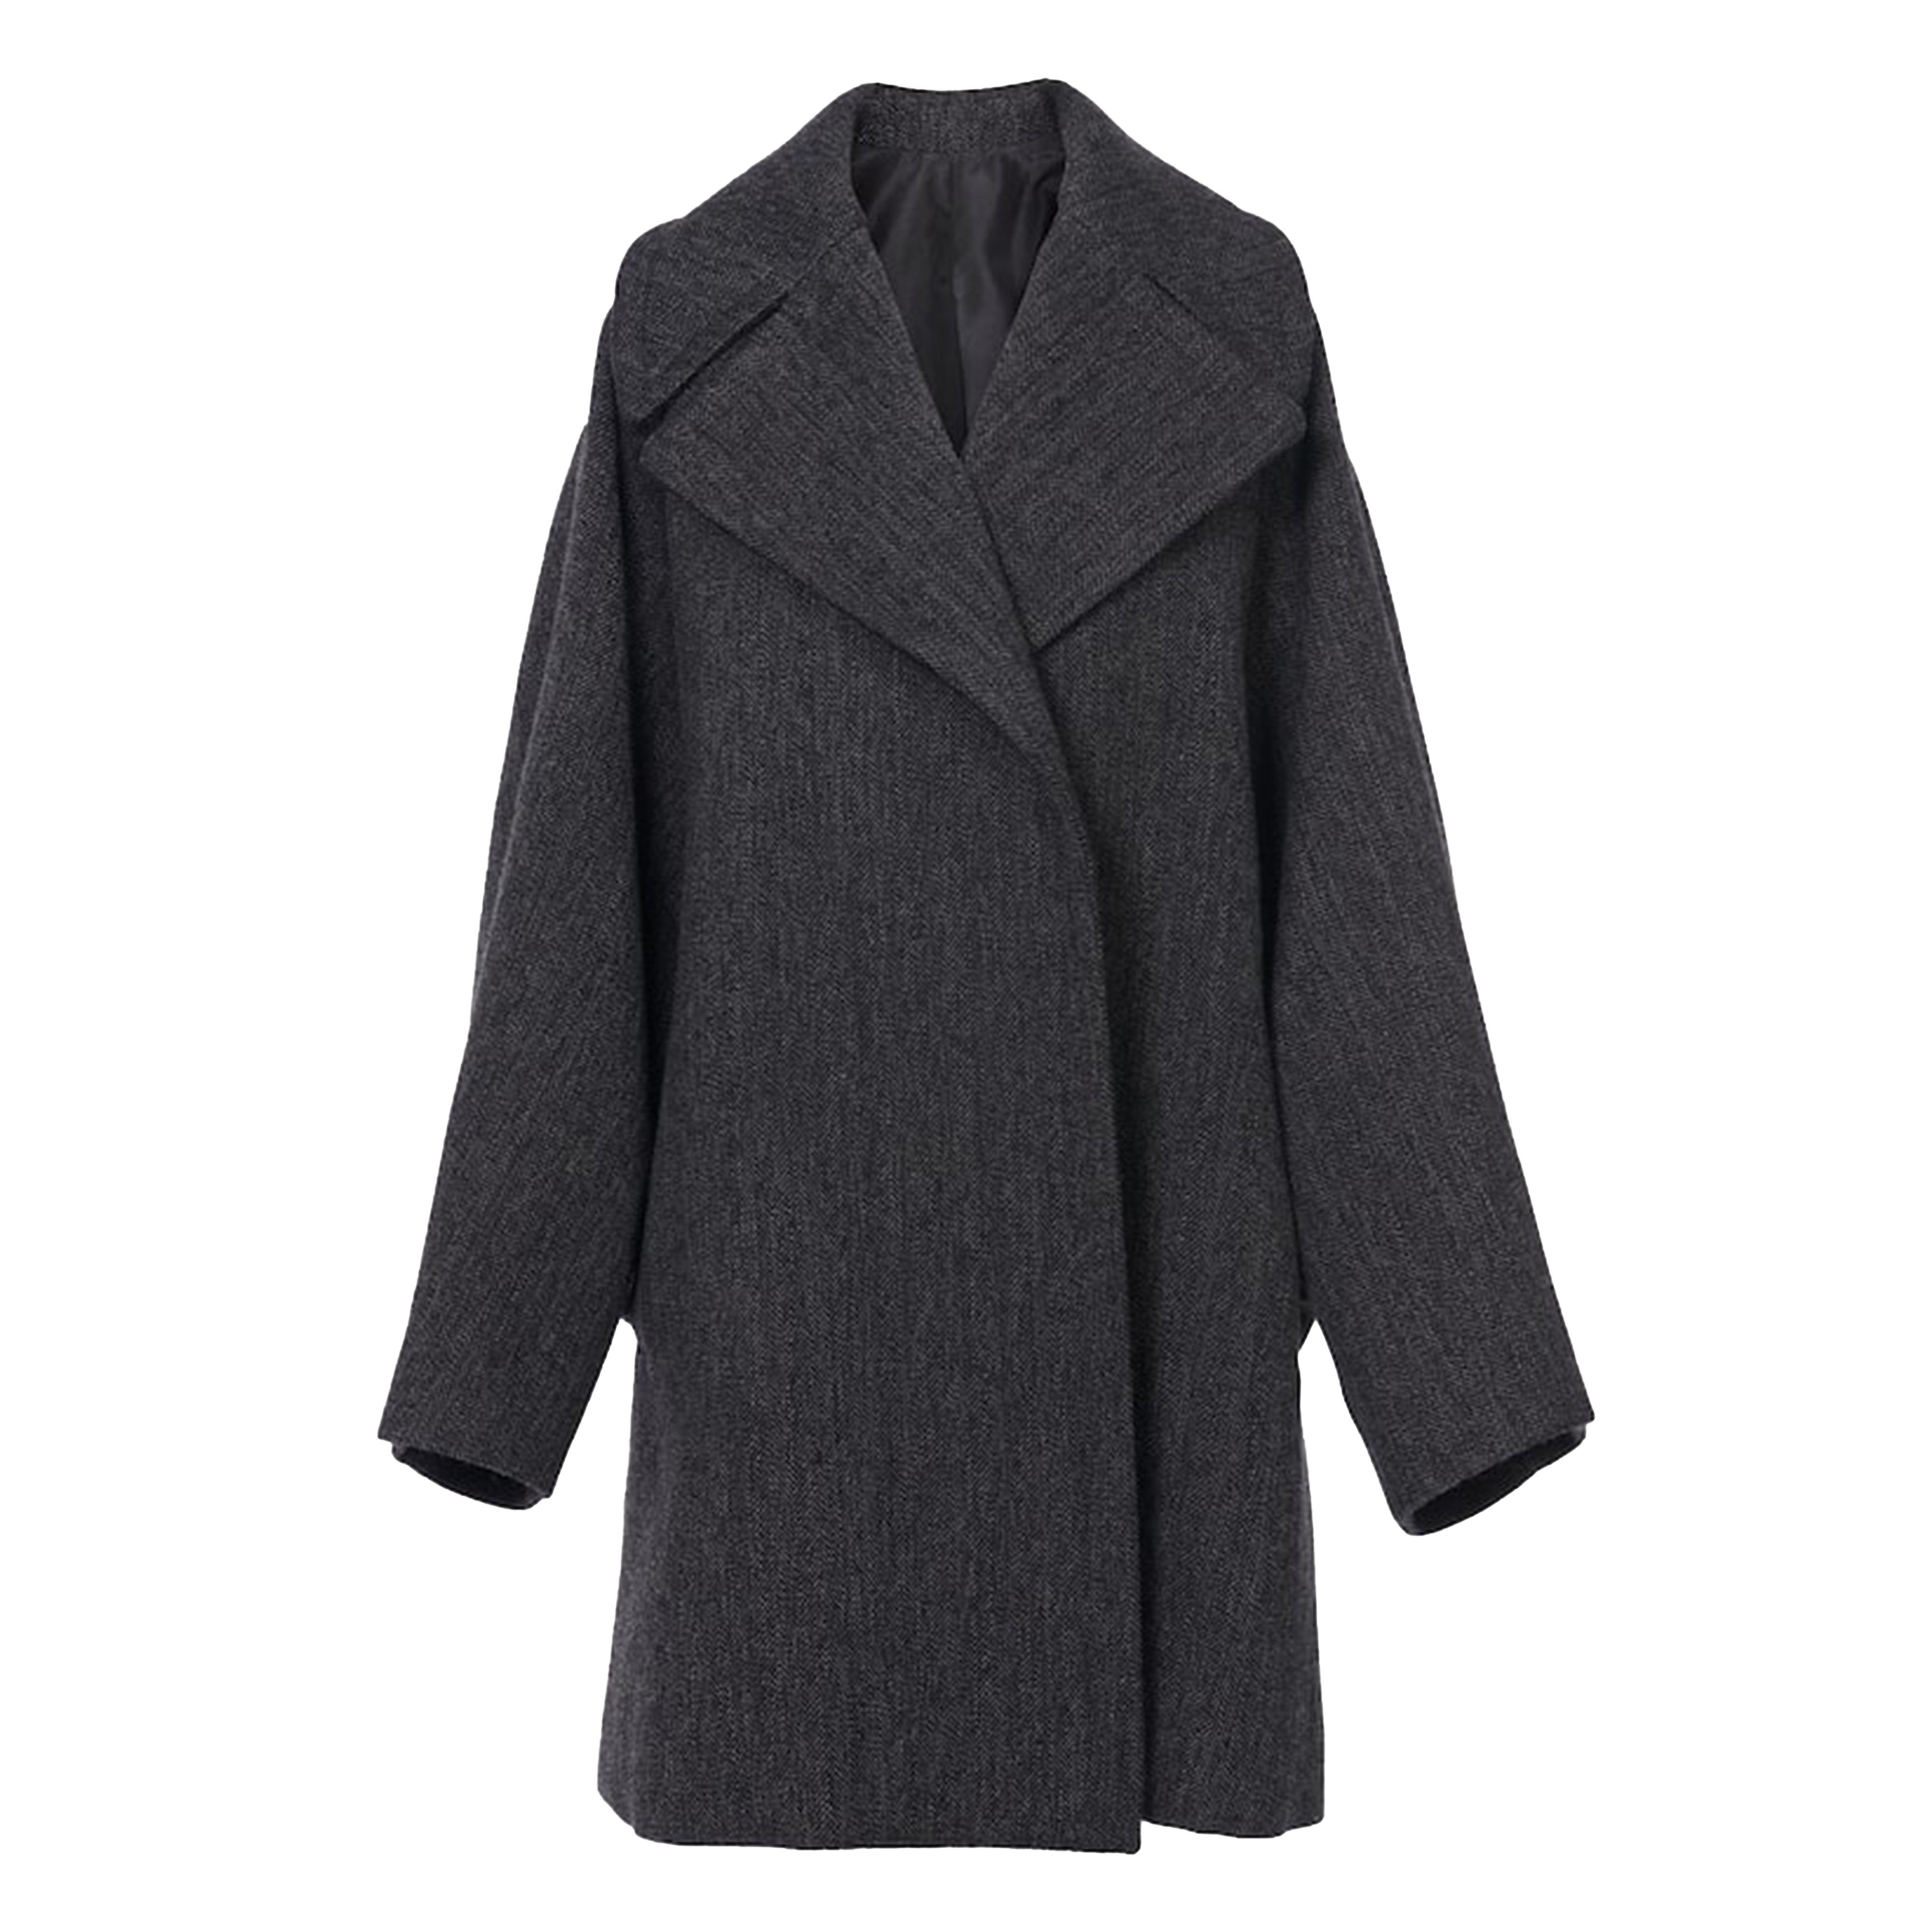 AlaÏa Oversized Belted Mid-Length Coat (Charcoal) by AZZEDINE ALAIA